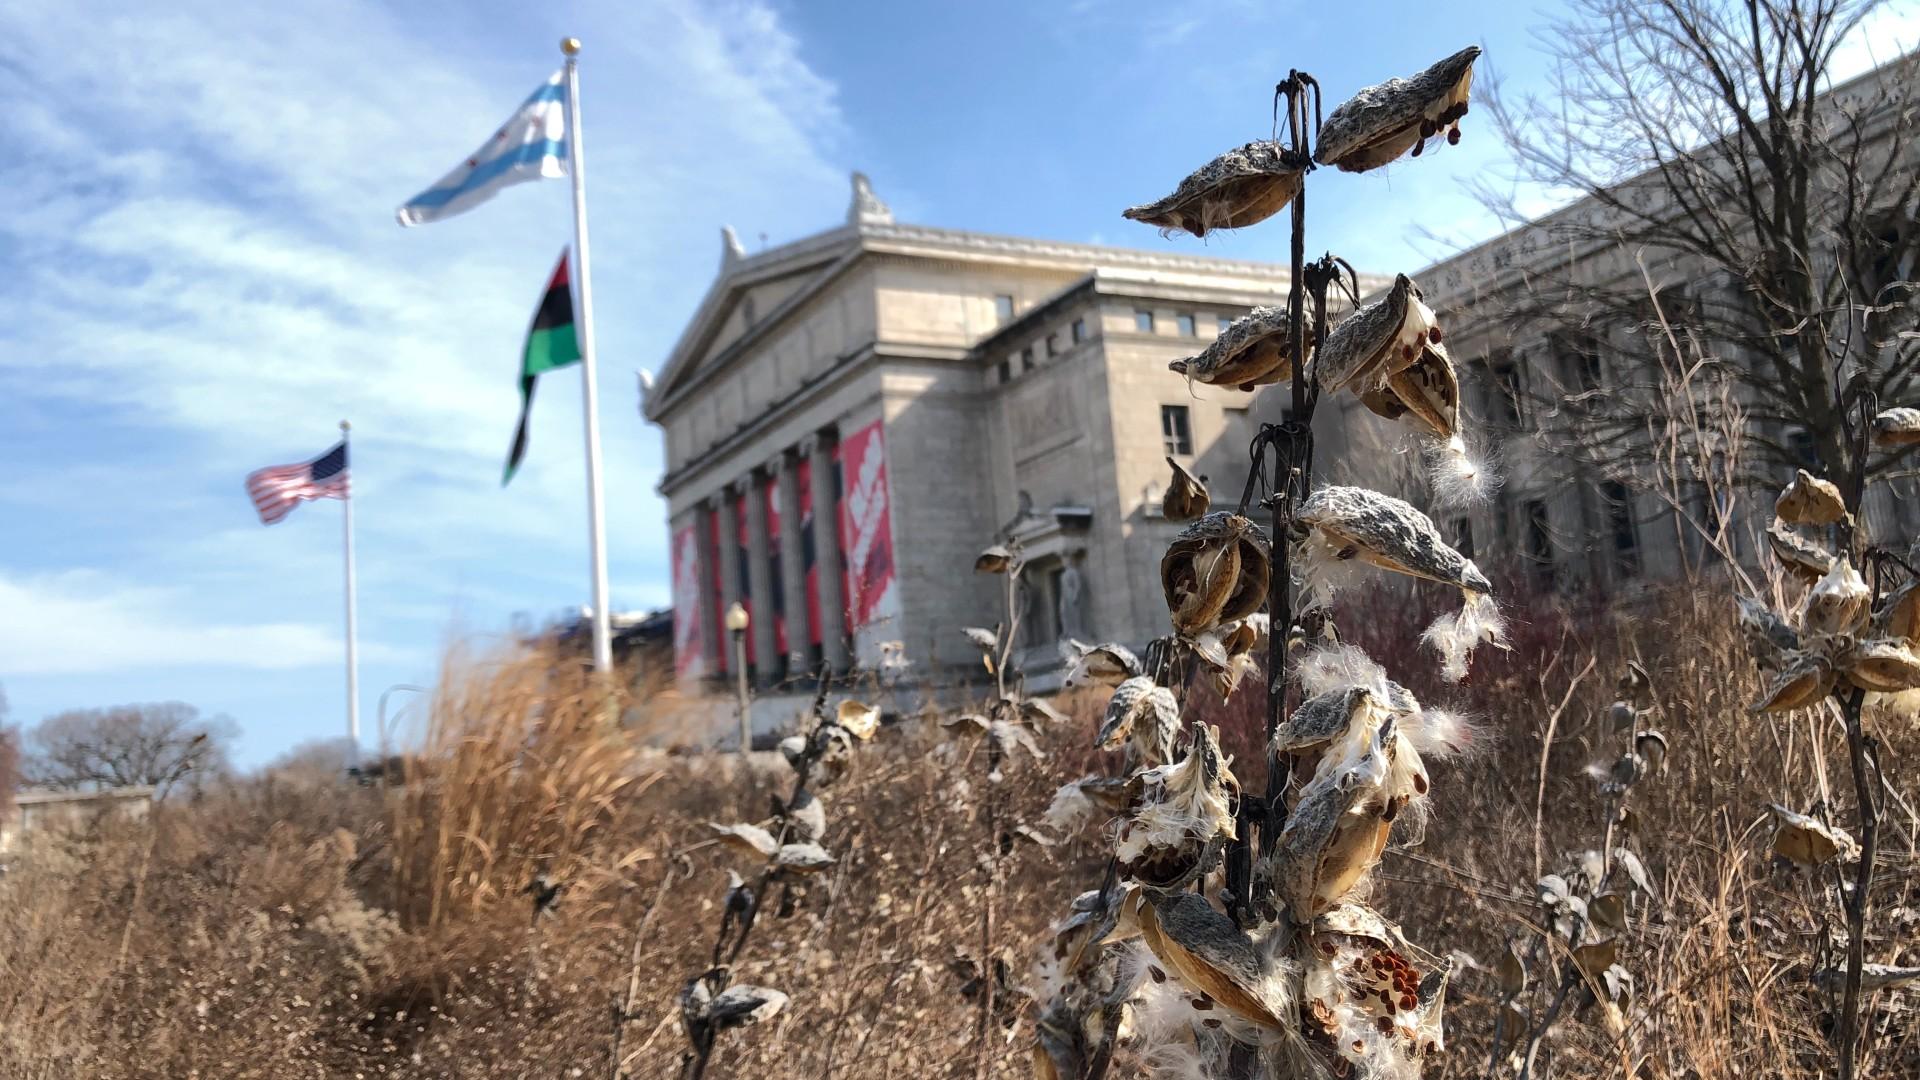 Milkweed stems stand tall in the Field Museum's Rice Native Gardens. In the past, gardeners have been threatened with fines when native plants were mistaken for weeds. (Patty Wetli / WTTW News)